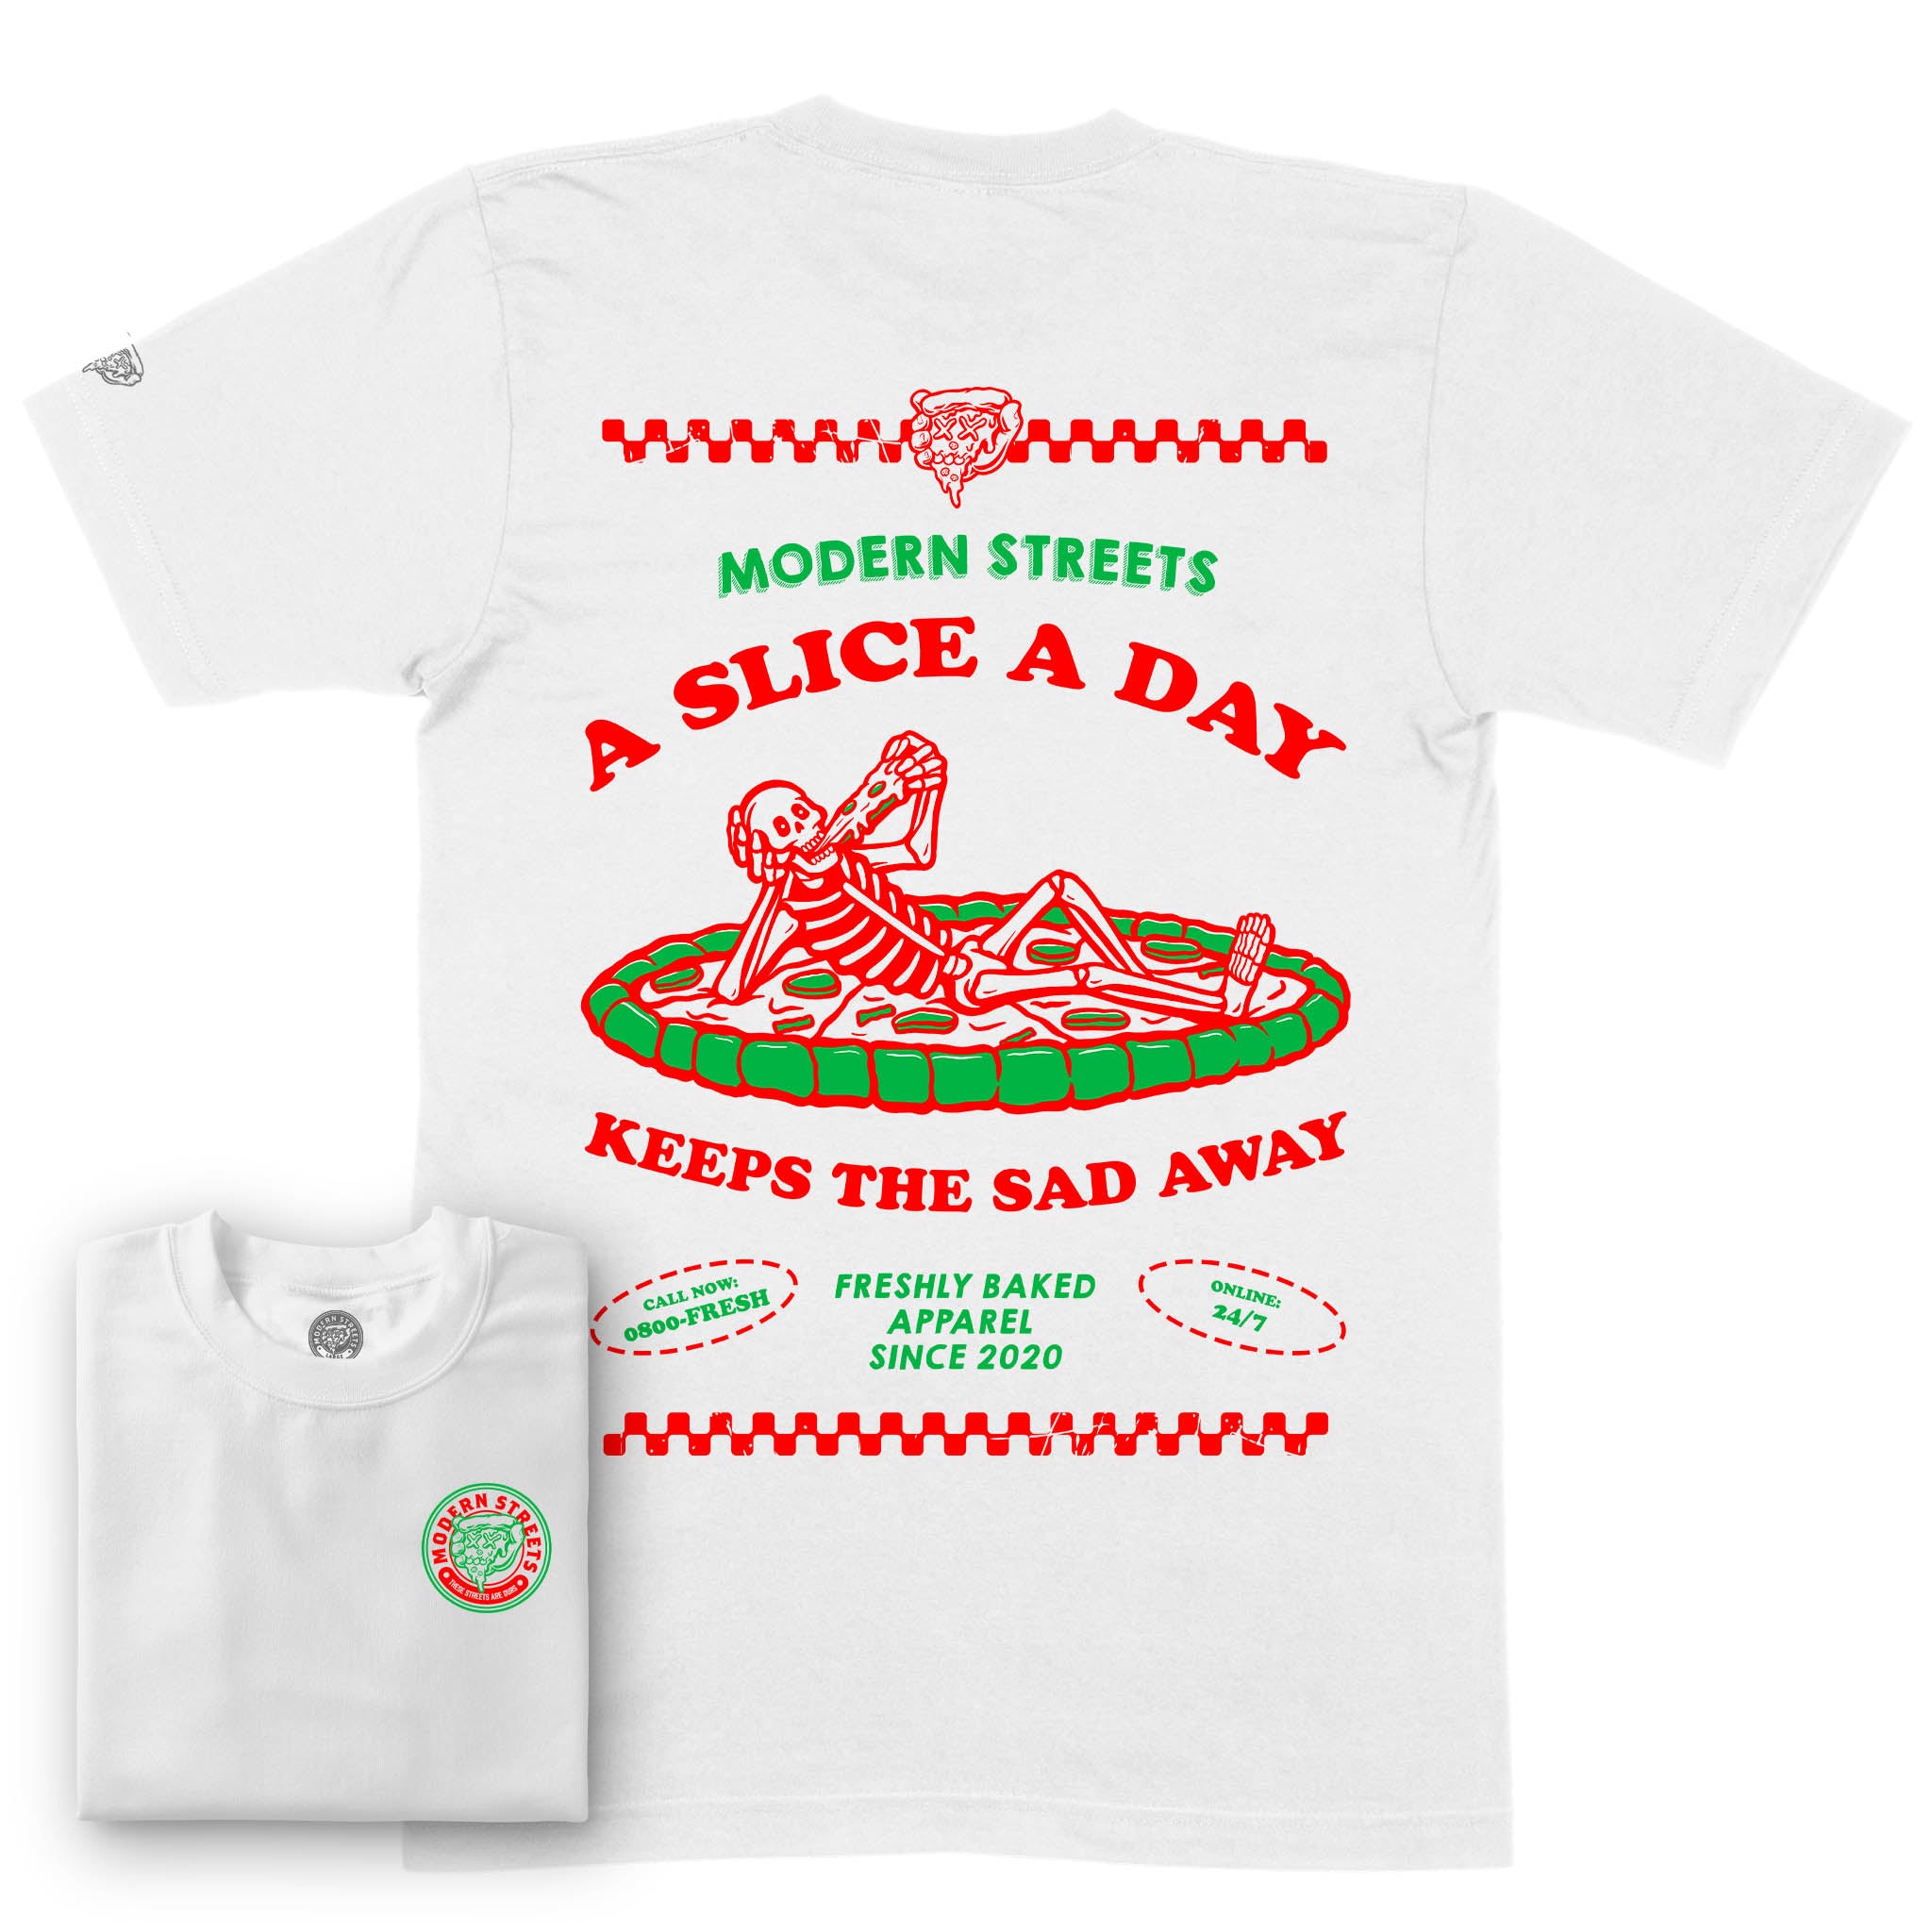 A Slice A Day T-Shirt